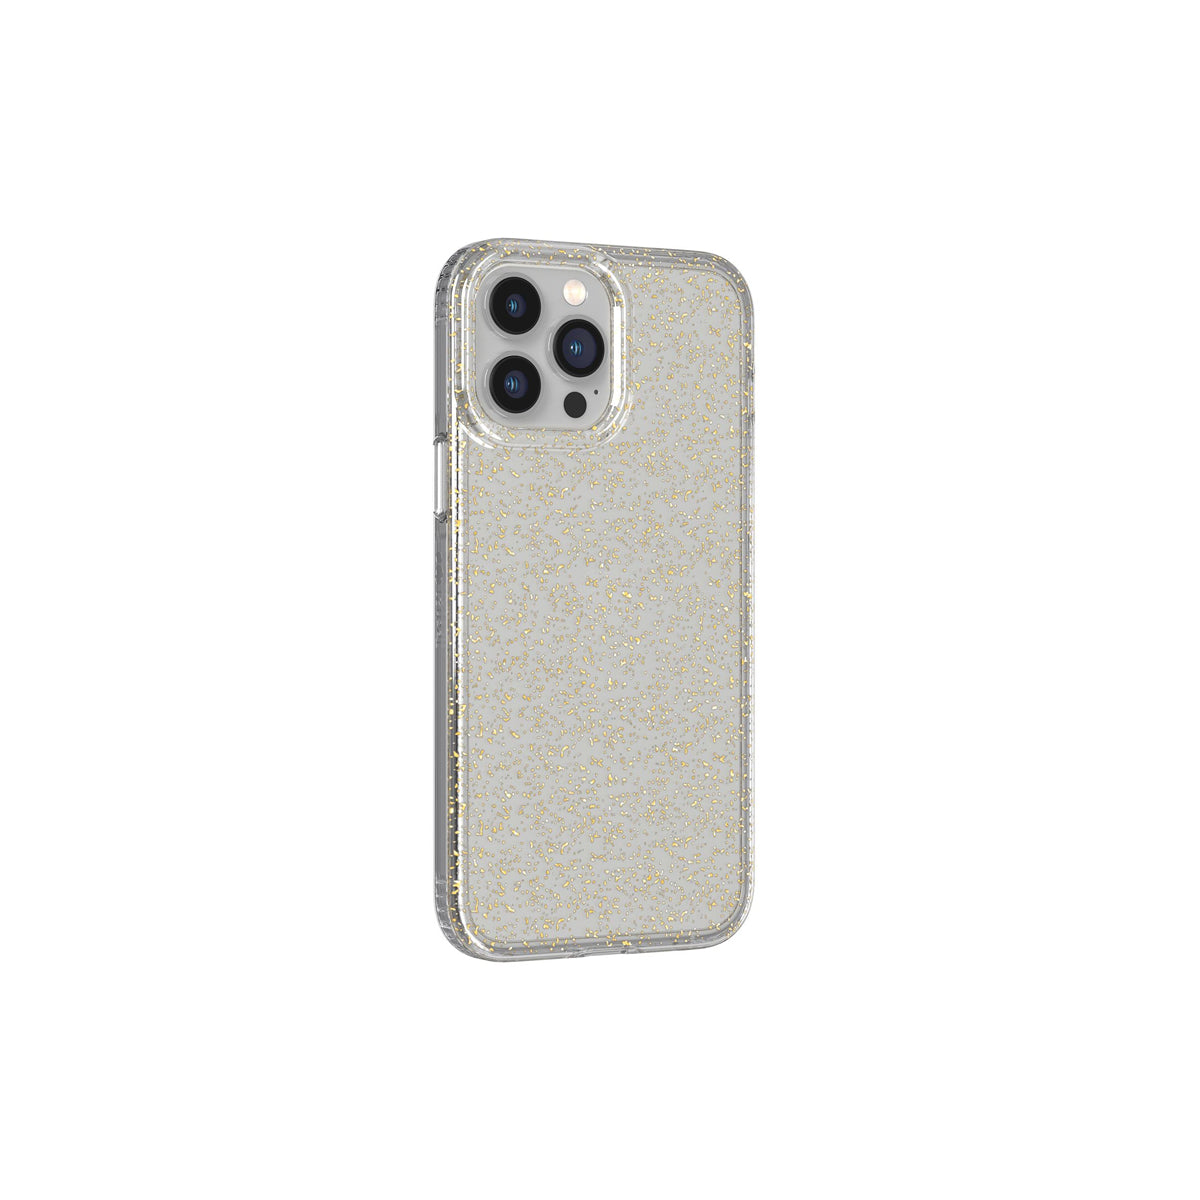 Tech21 Evo Sparkle Phone Case for iPhone 13 Pro Max.